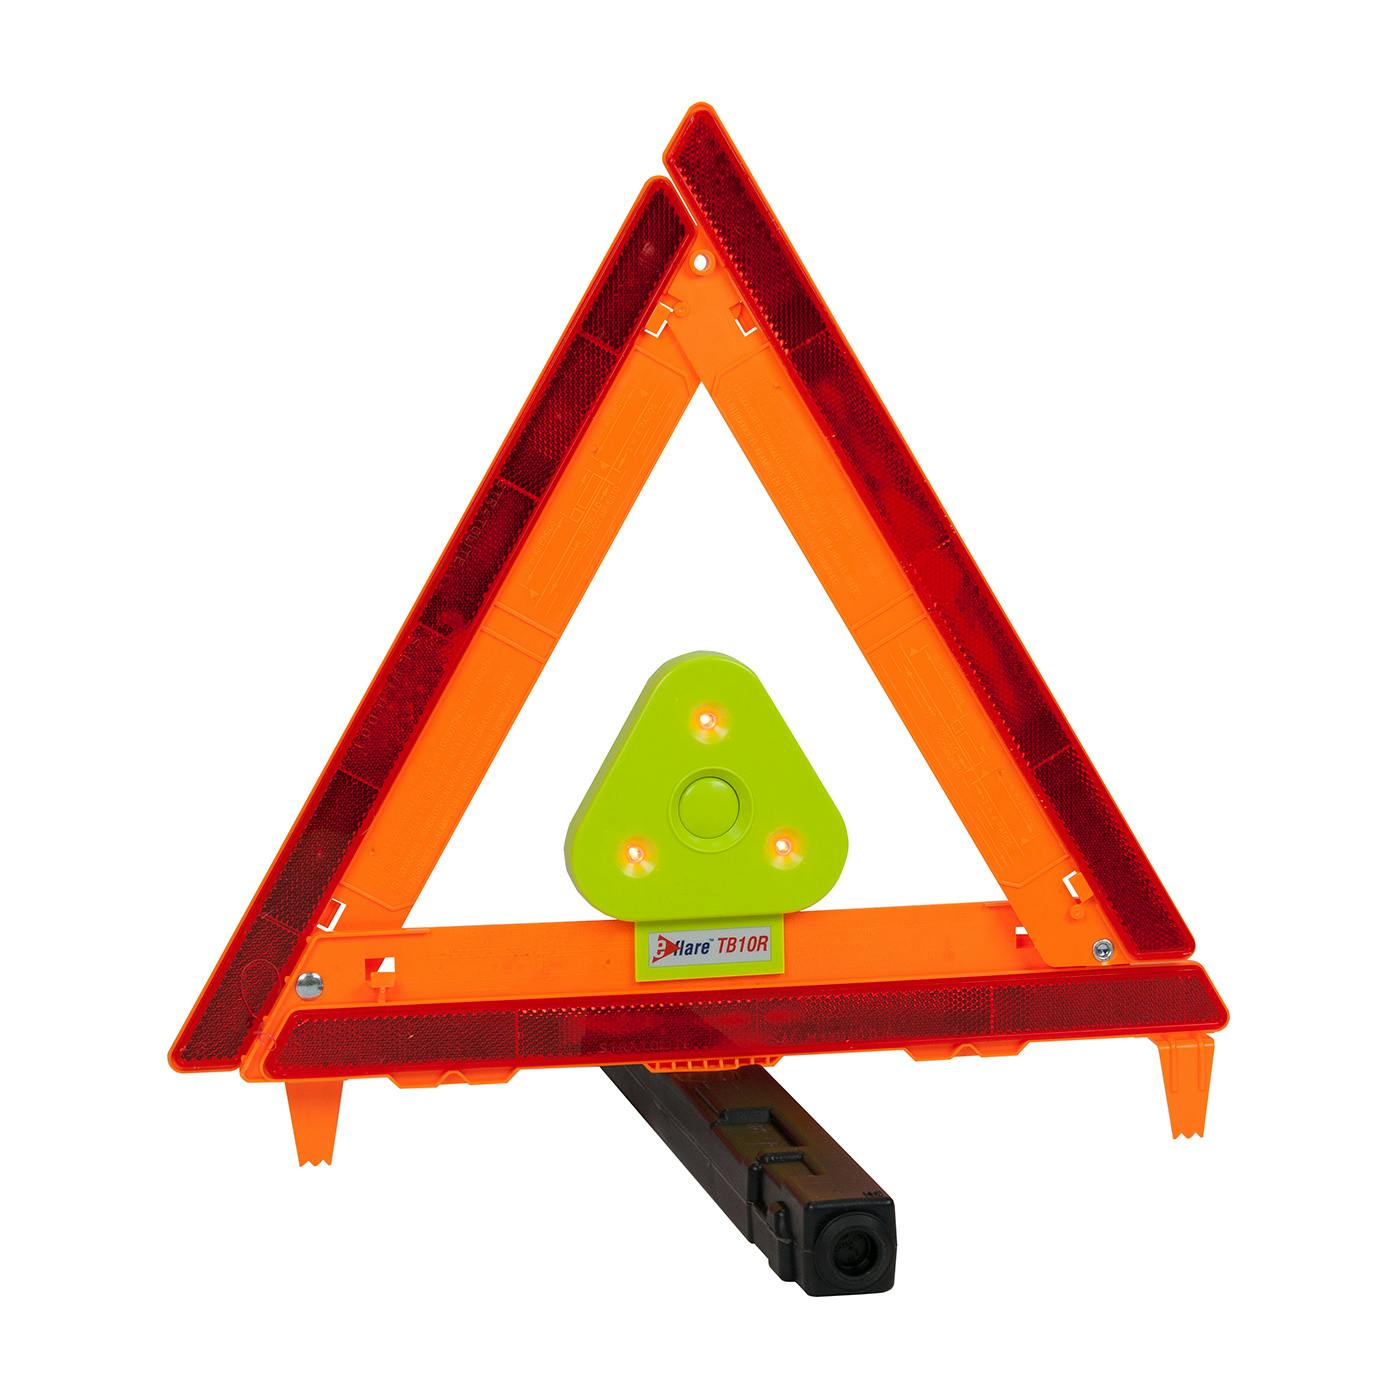 Safety & Emergency Beacon for Safety Triangles - Flashing Red, Red (939-TB10-R) - 4